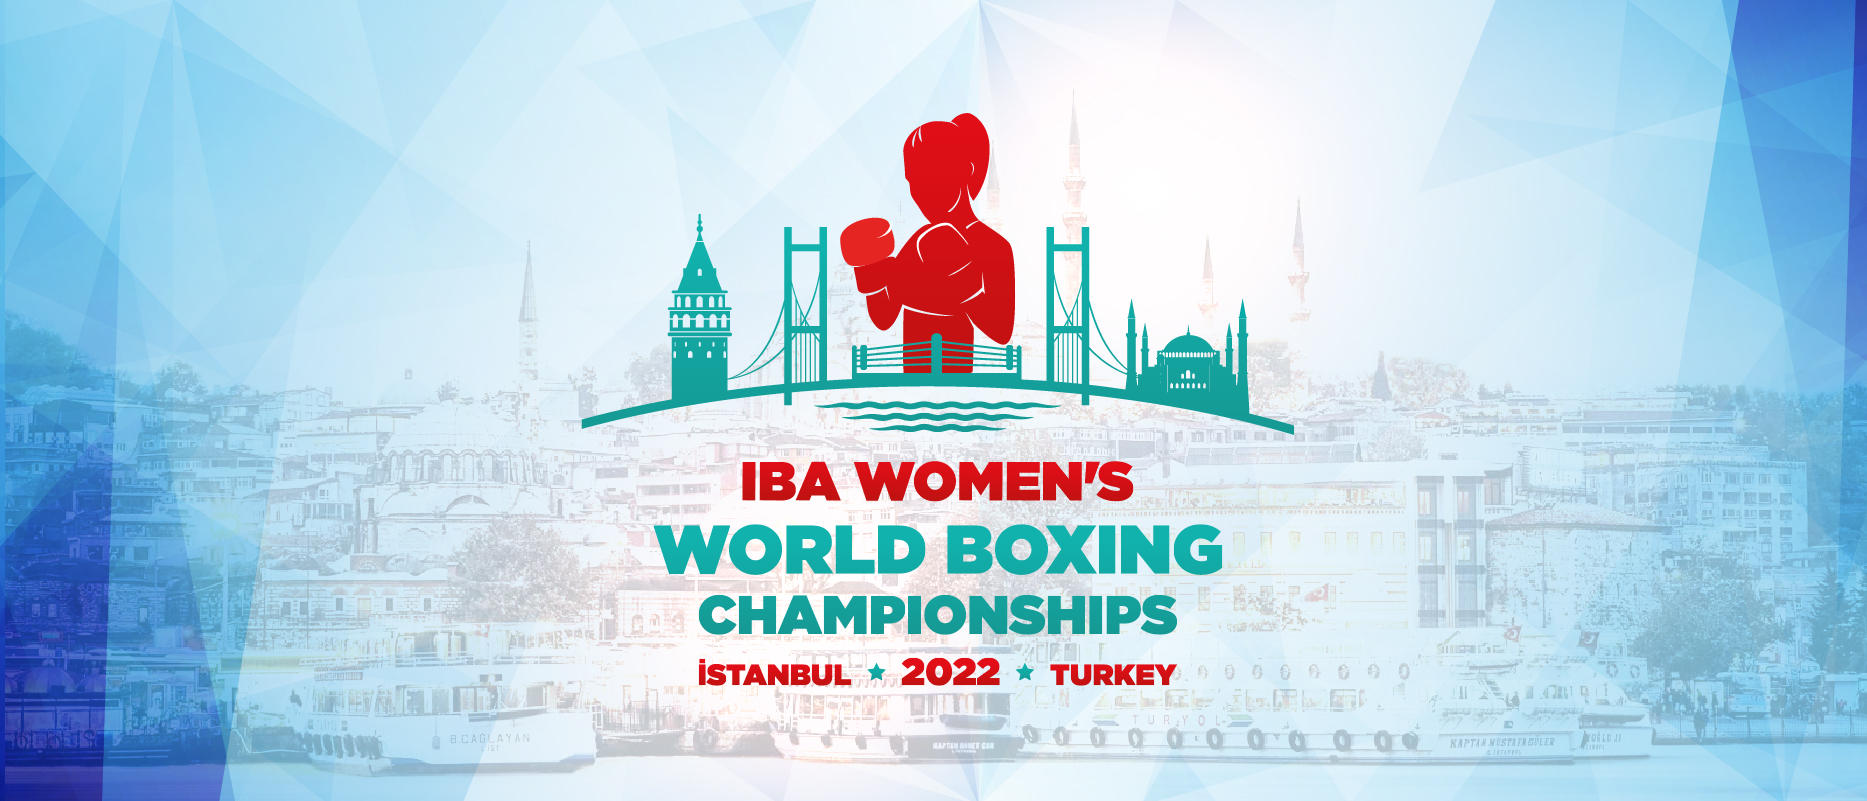 IBA Women's World Boxing Championships: Turkey topped medal tally of 2022_40.1